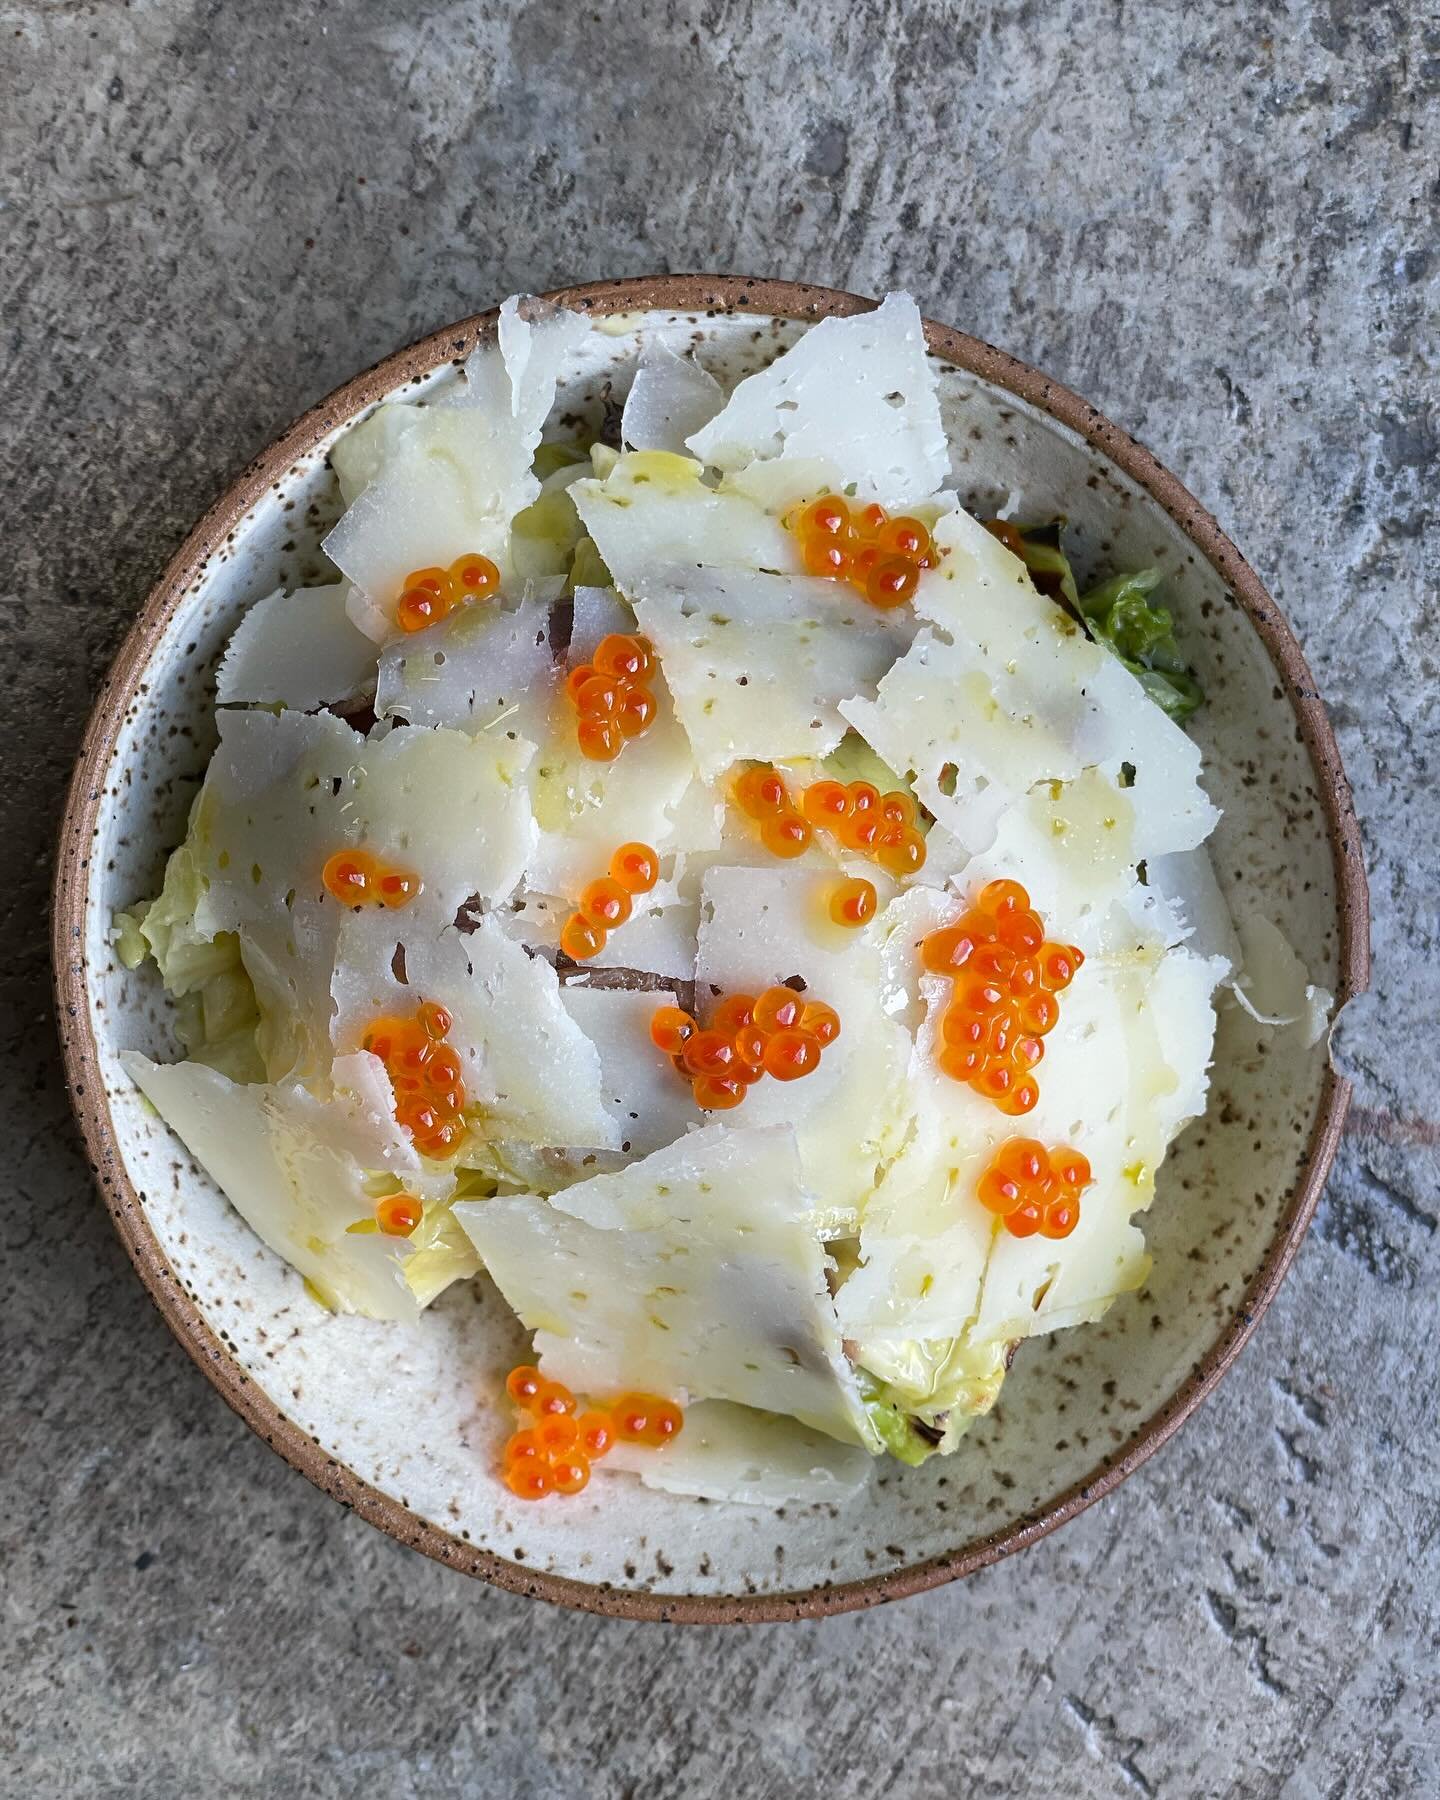 New &ldquo;Not Pizza&rdquo; on the menu this week with some beautiful cone cabbage from our dude @_farmage_  As always there are lots of new things hitting the menu this week, come check them out.

Wood Fired Cabbage - Sicilian anchovy, Sardinian pec